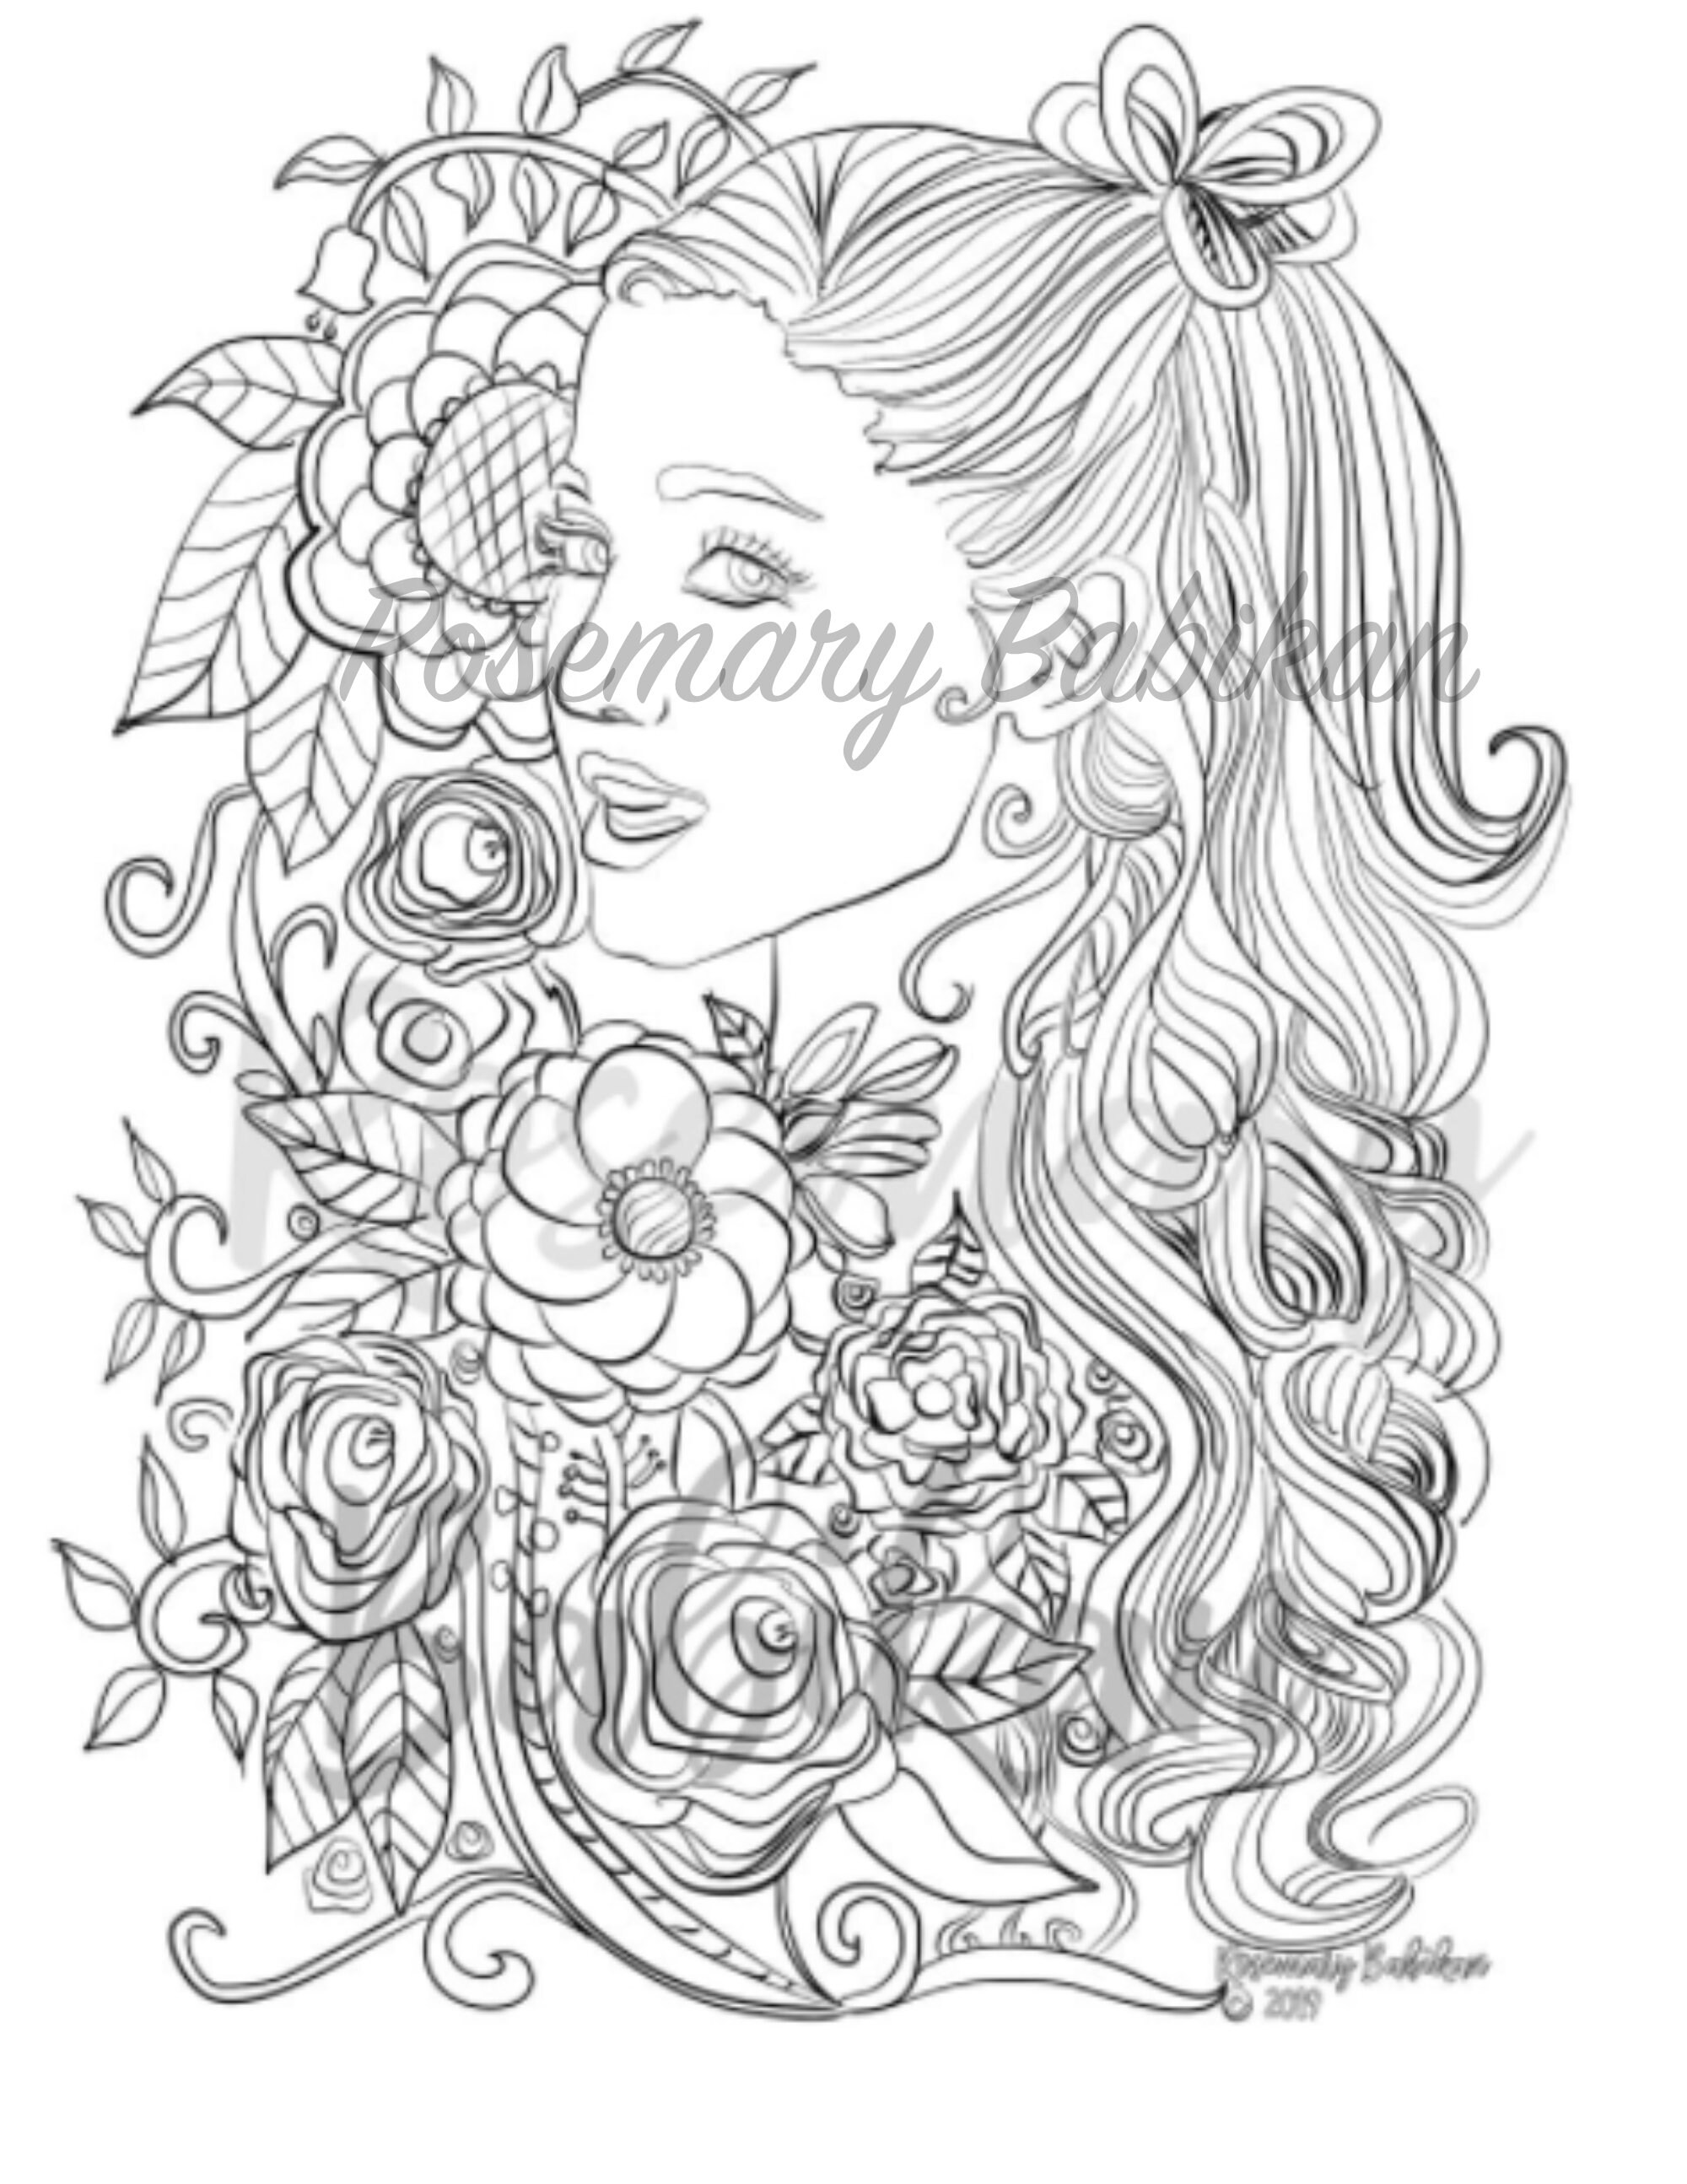 Instant Digital Download, Adult Coloring Page, Inspired by Ariana Grande  and Flowers and Roses, 20 DPI in JPEG, 20..20 x 20 inches.